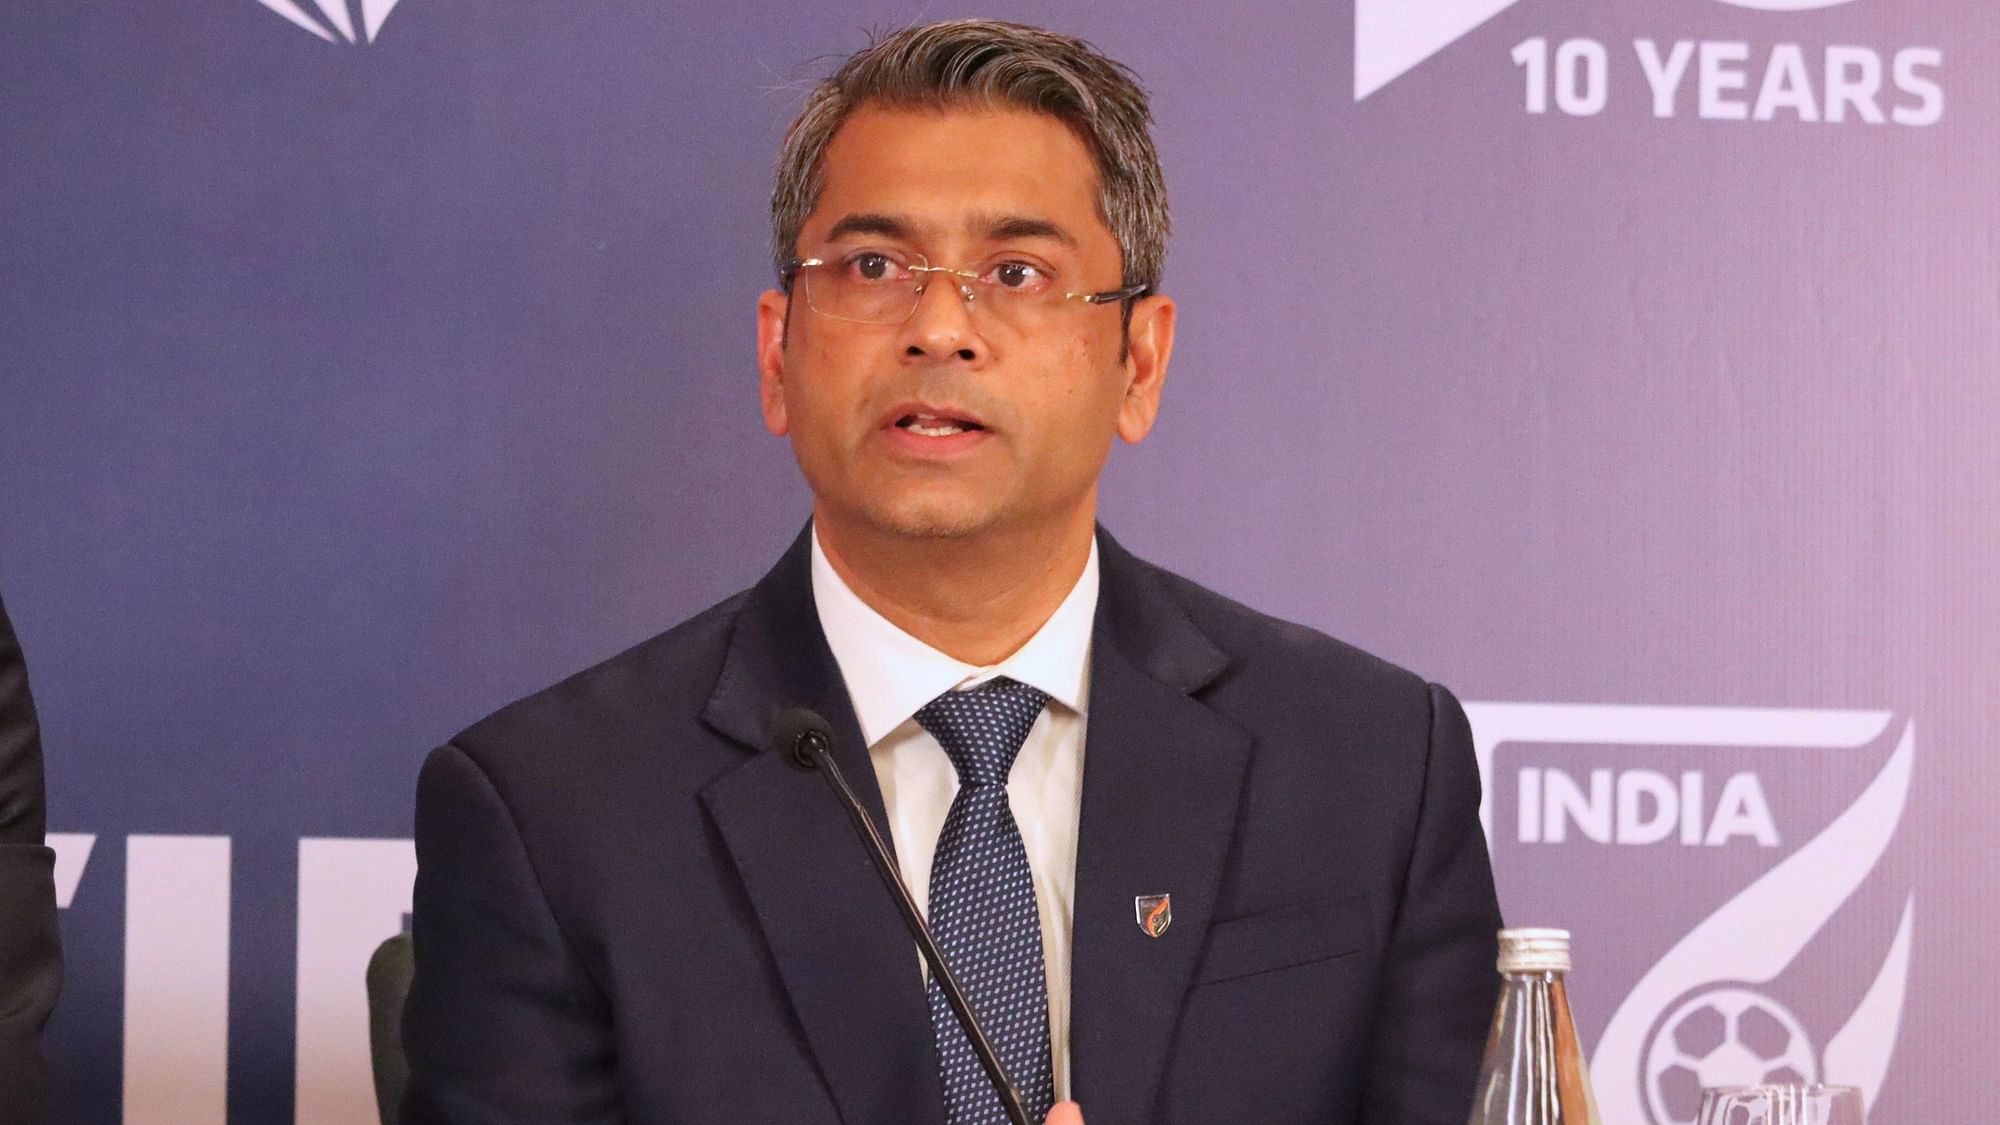 <div class="paragraphs"><p>AIFF President Kalyan Chaubey reiterates commitment to protect integrity of the game</p></div>